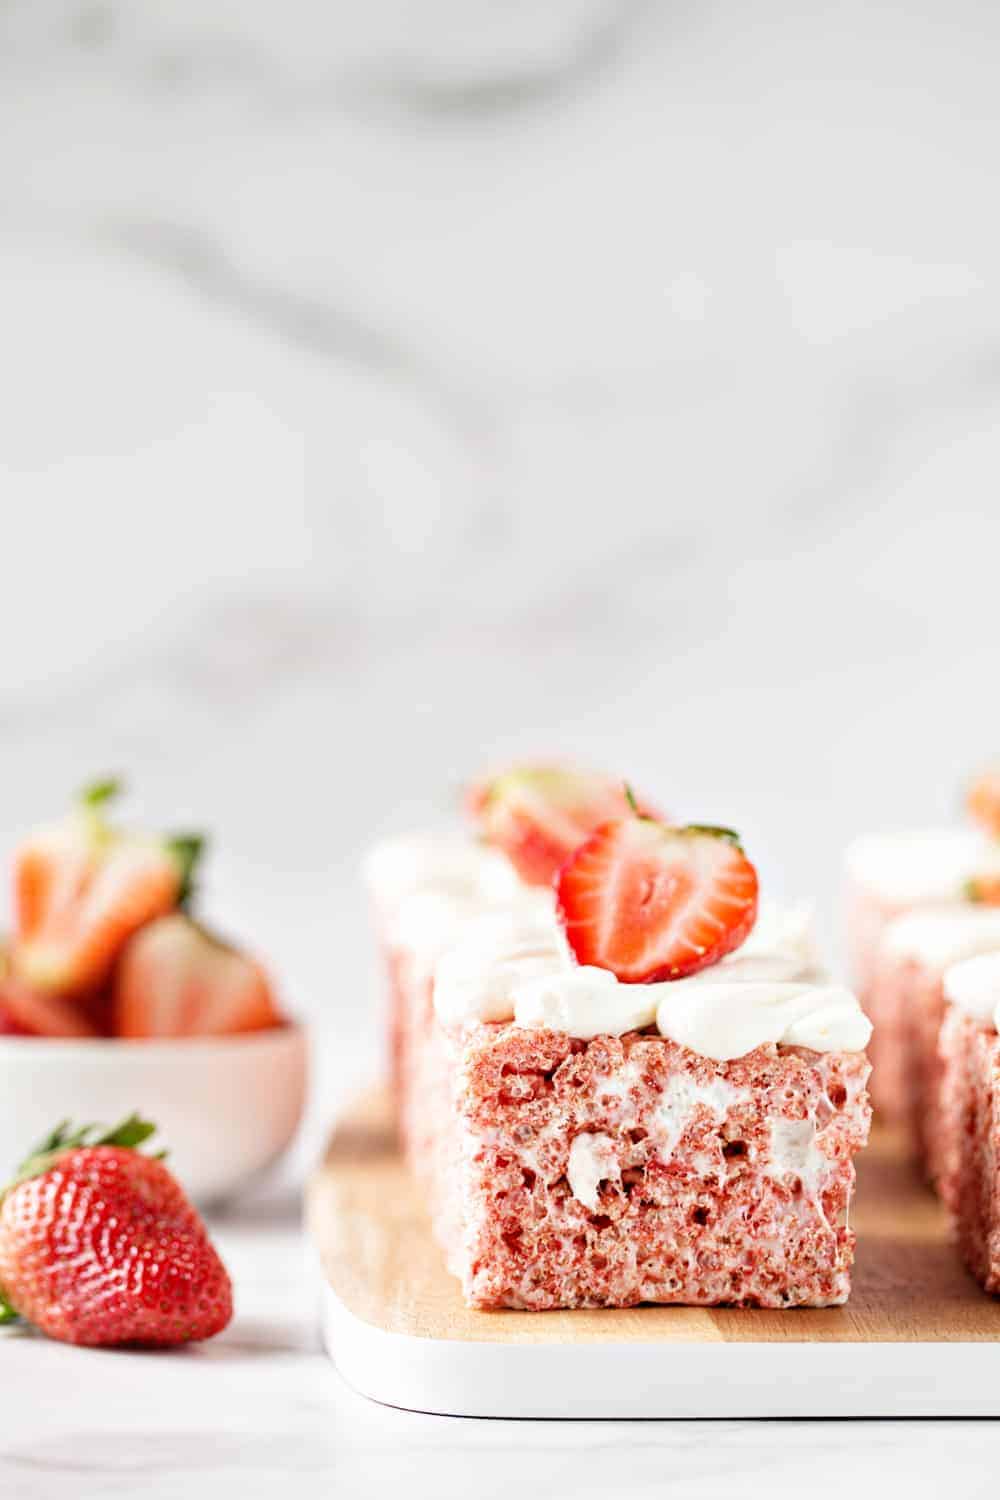 Strawberry Rice Krispie Treats are the perfect simple dessert for Spring. Fluffy vanilla buttercream and fresh strawberries take them to the next level!